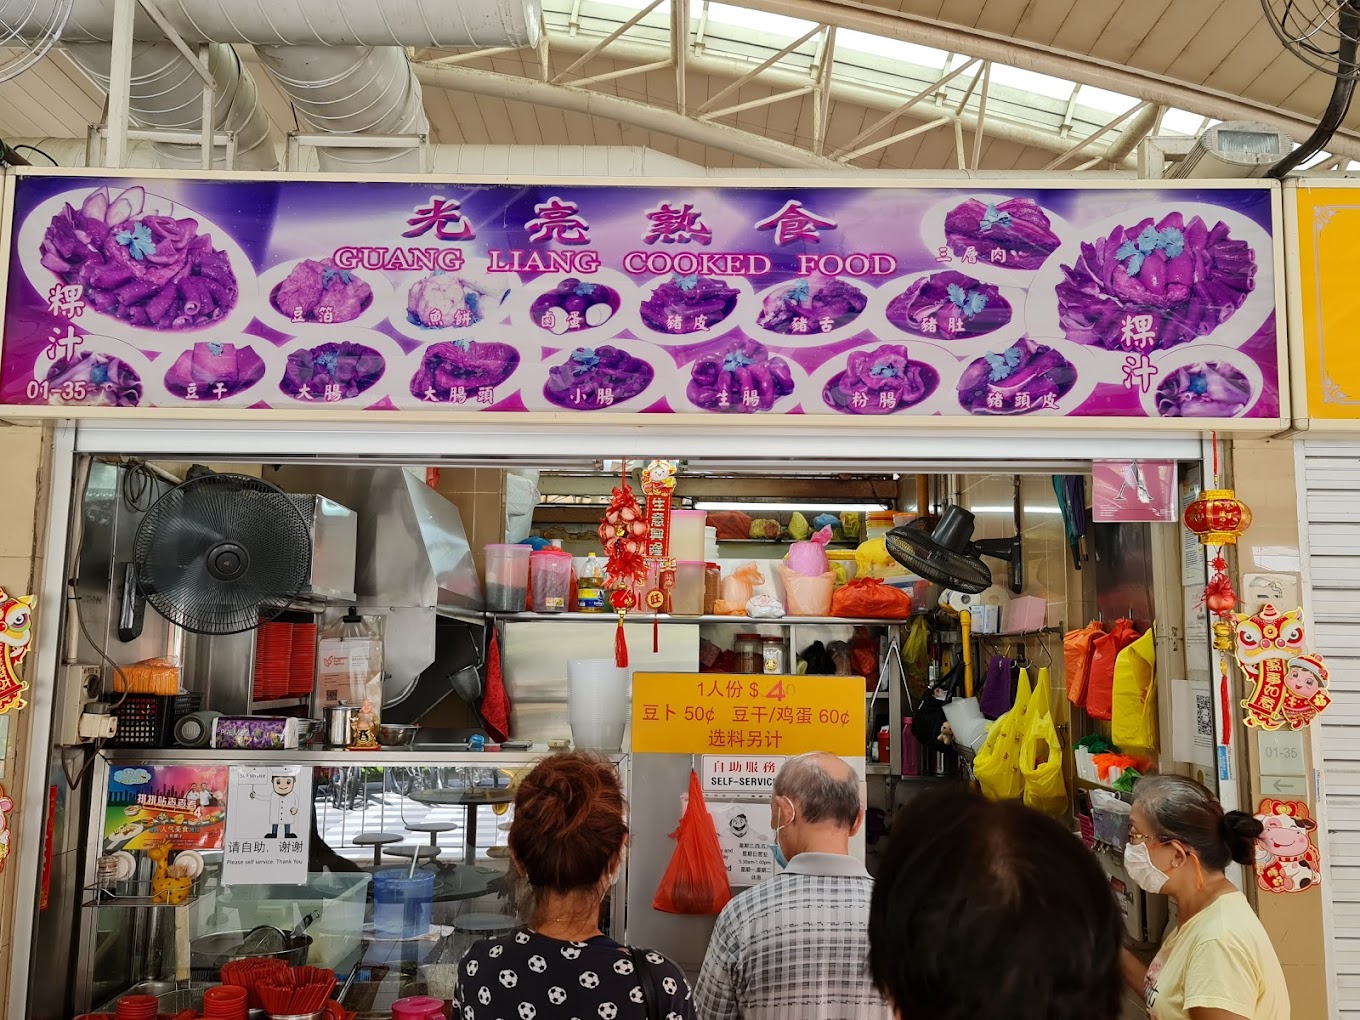 Bedok Reservoir Food Centre — Guang Liang Cooked Food